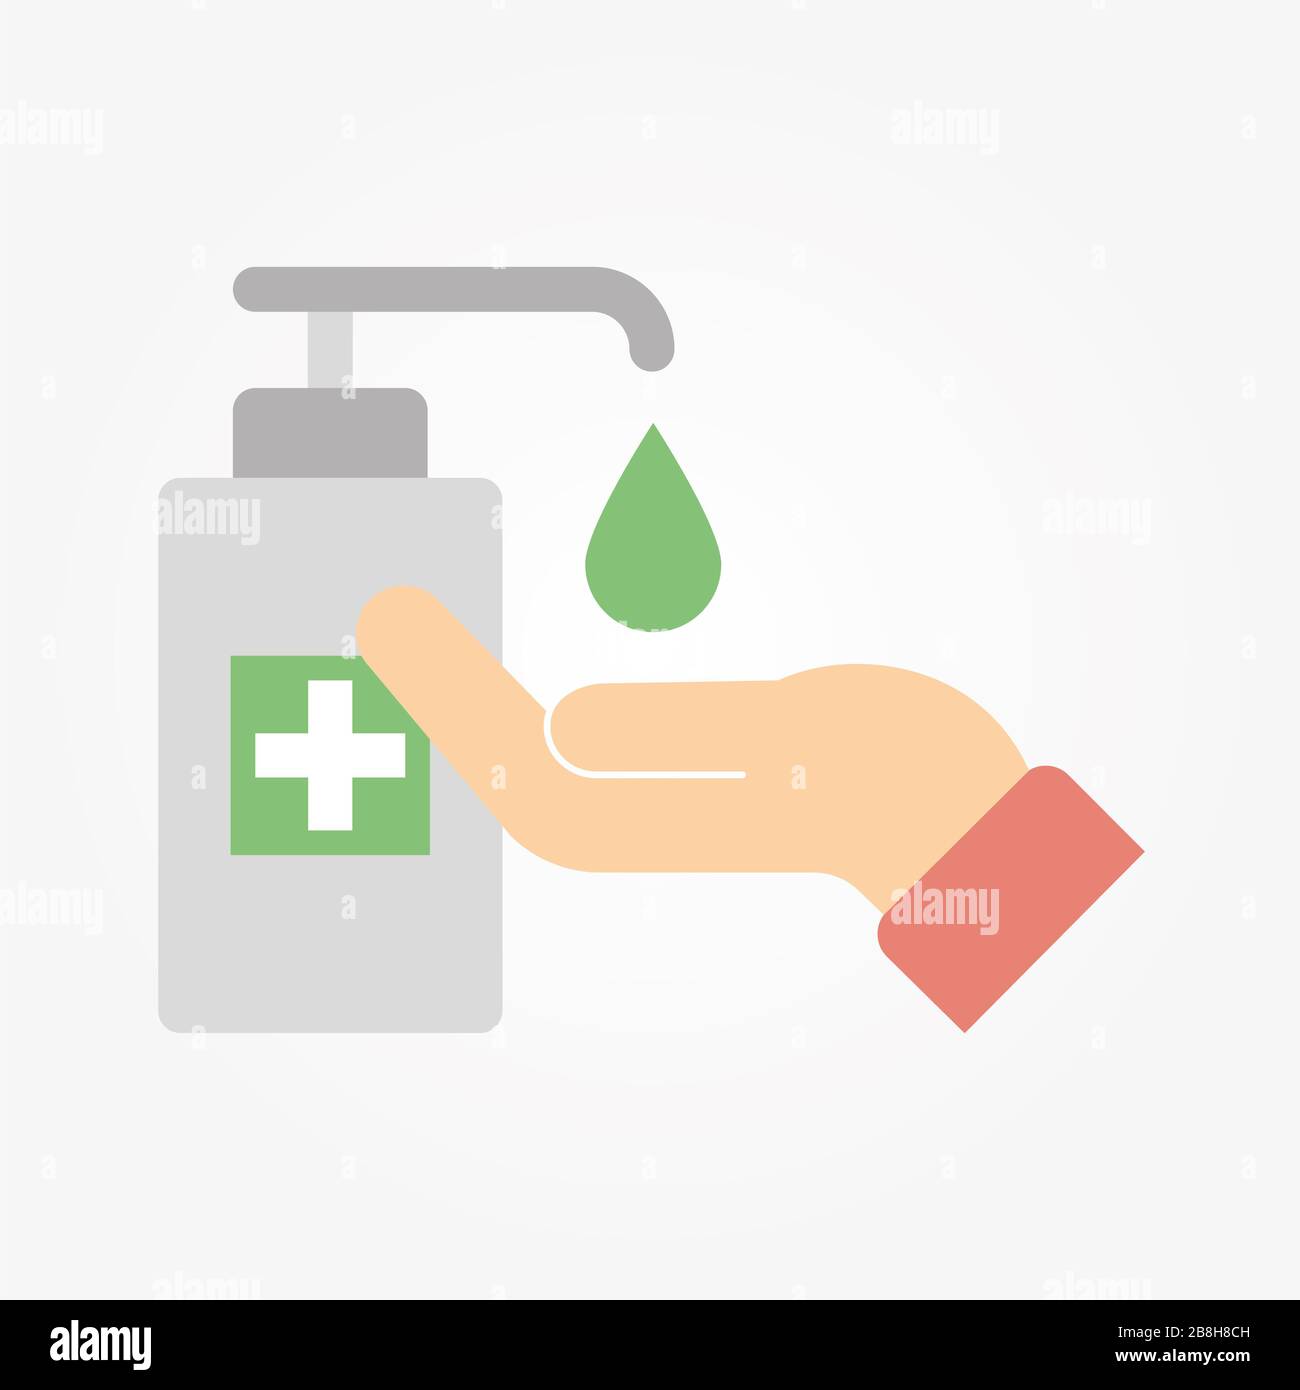 Wash / disinfect / sanitize your hands regularly and thoroughly for a good hygiene and health and to avoid infection with a virus. Stock Photo